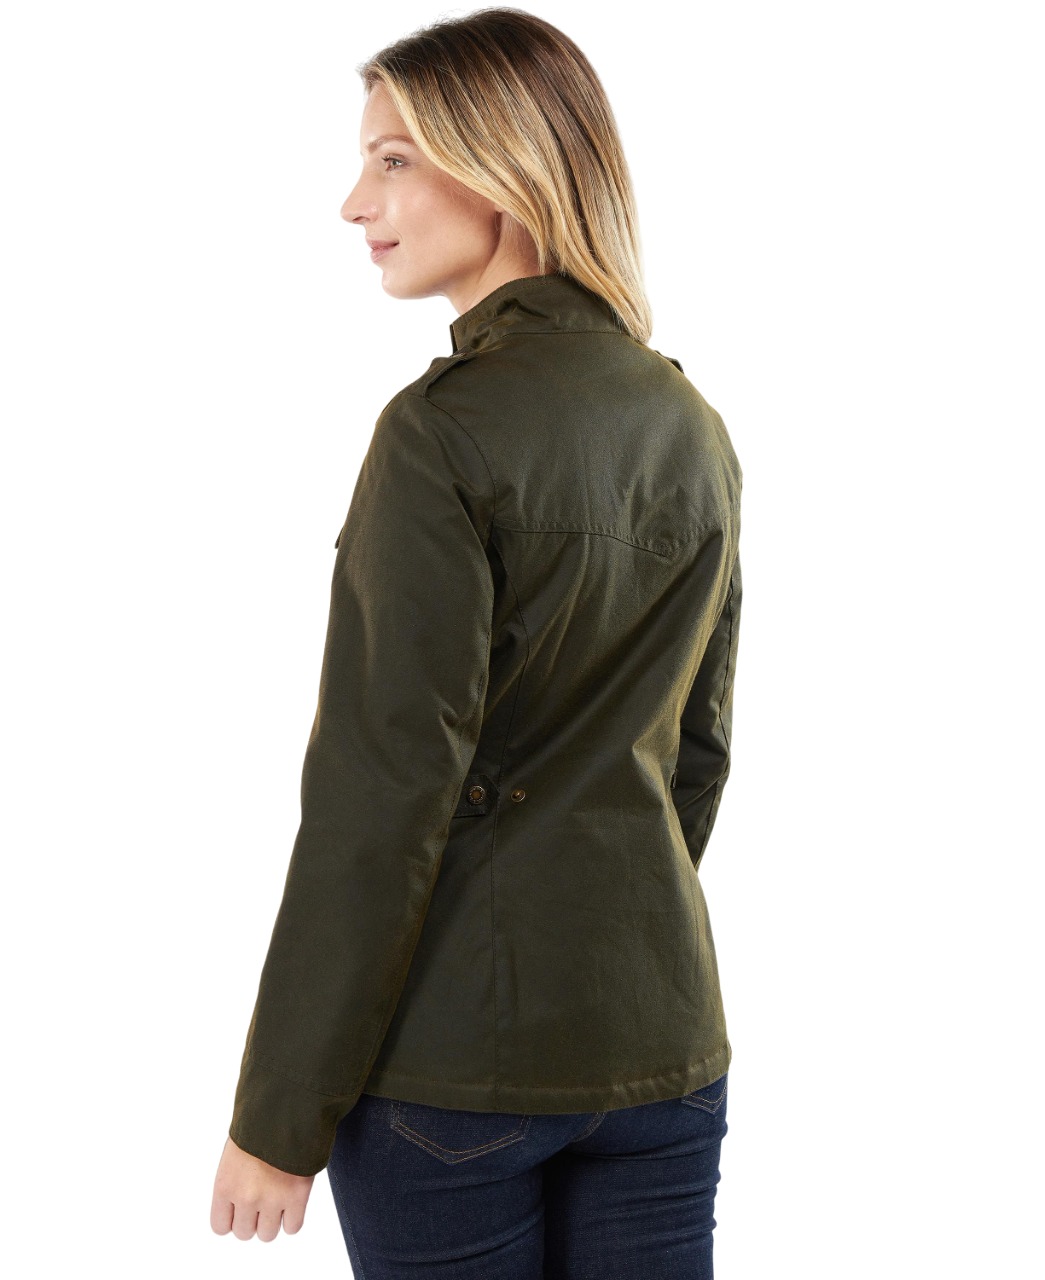 Barbour Winter Defence Wax Jacket - Robinsons Equestrian